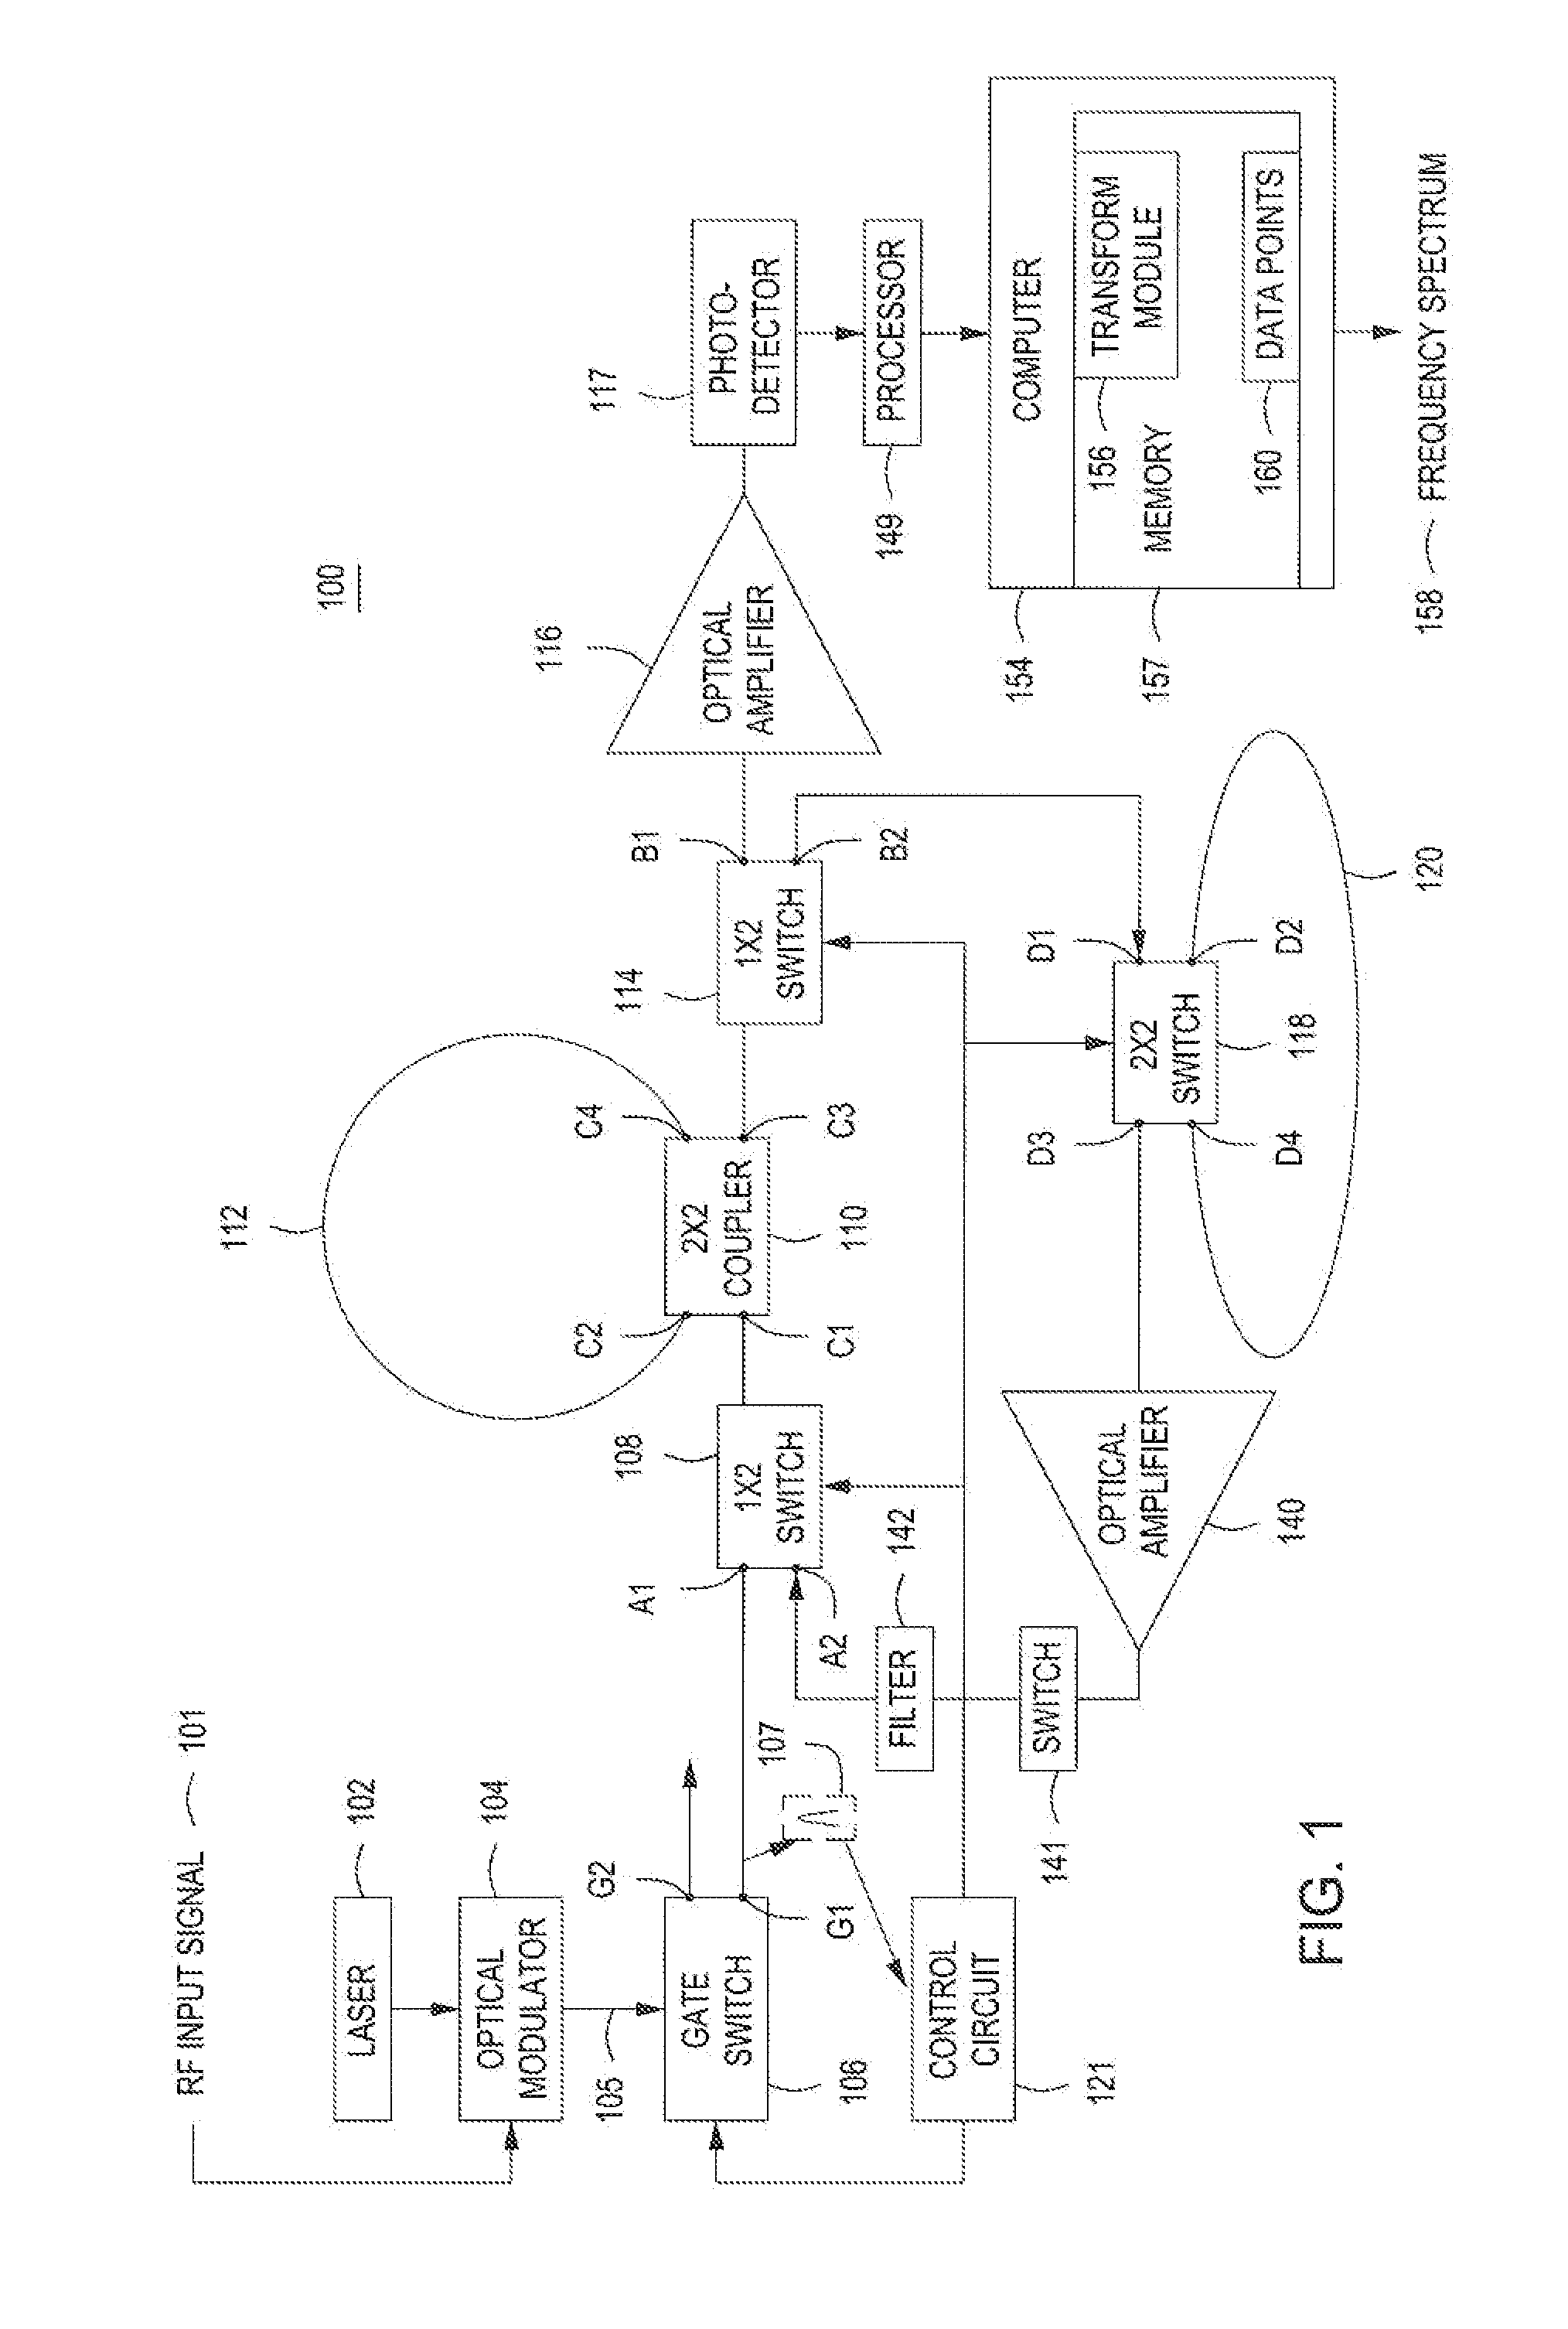 Method and Apparatus for Analyzing the Spectrum of Radio-Frequency Signals Using Unamplified Fiber Optic Recirculation Loops